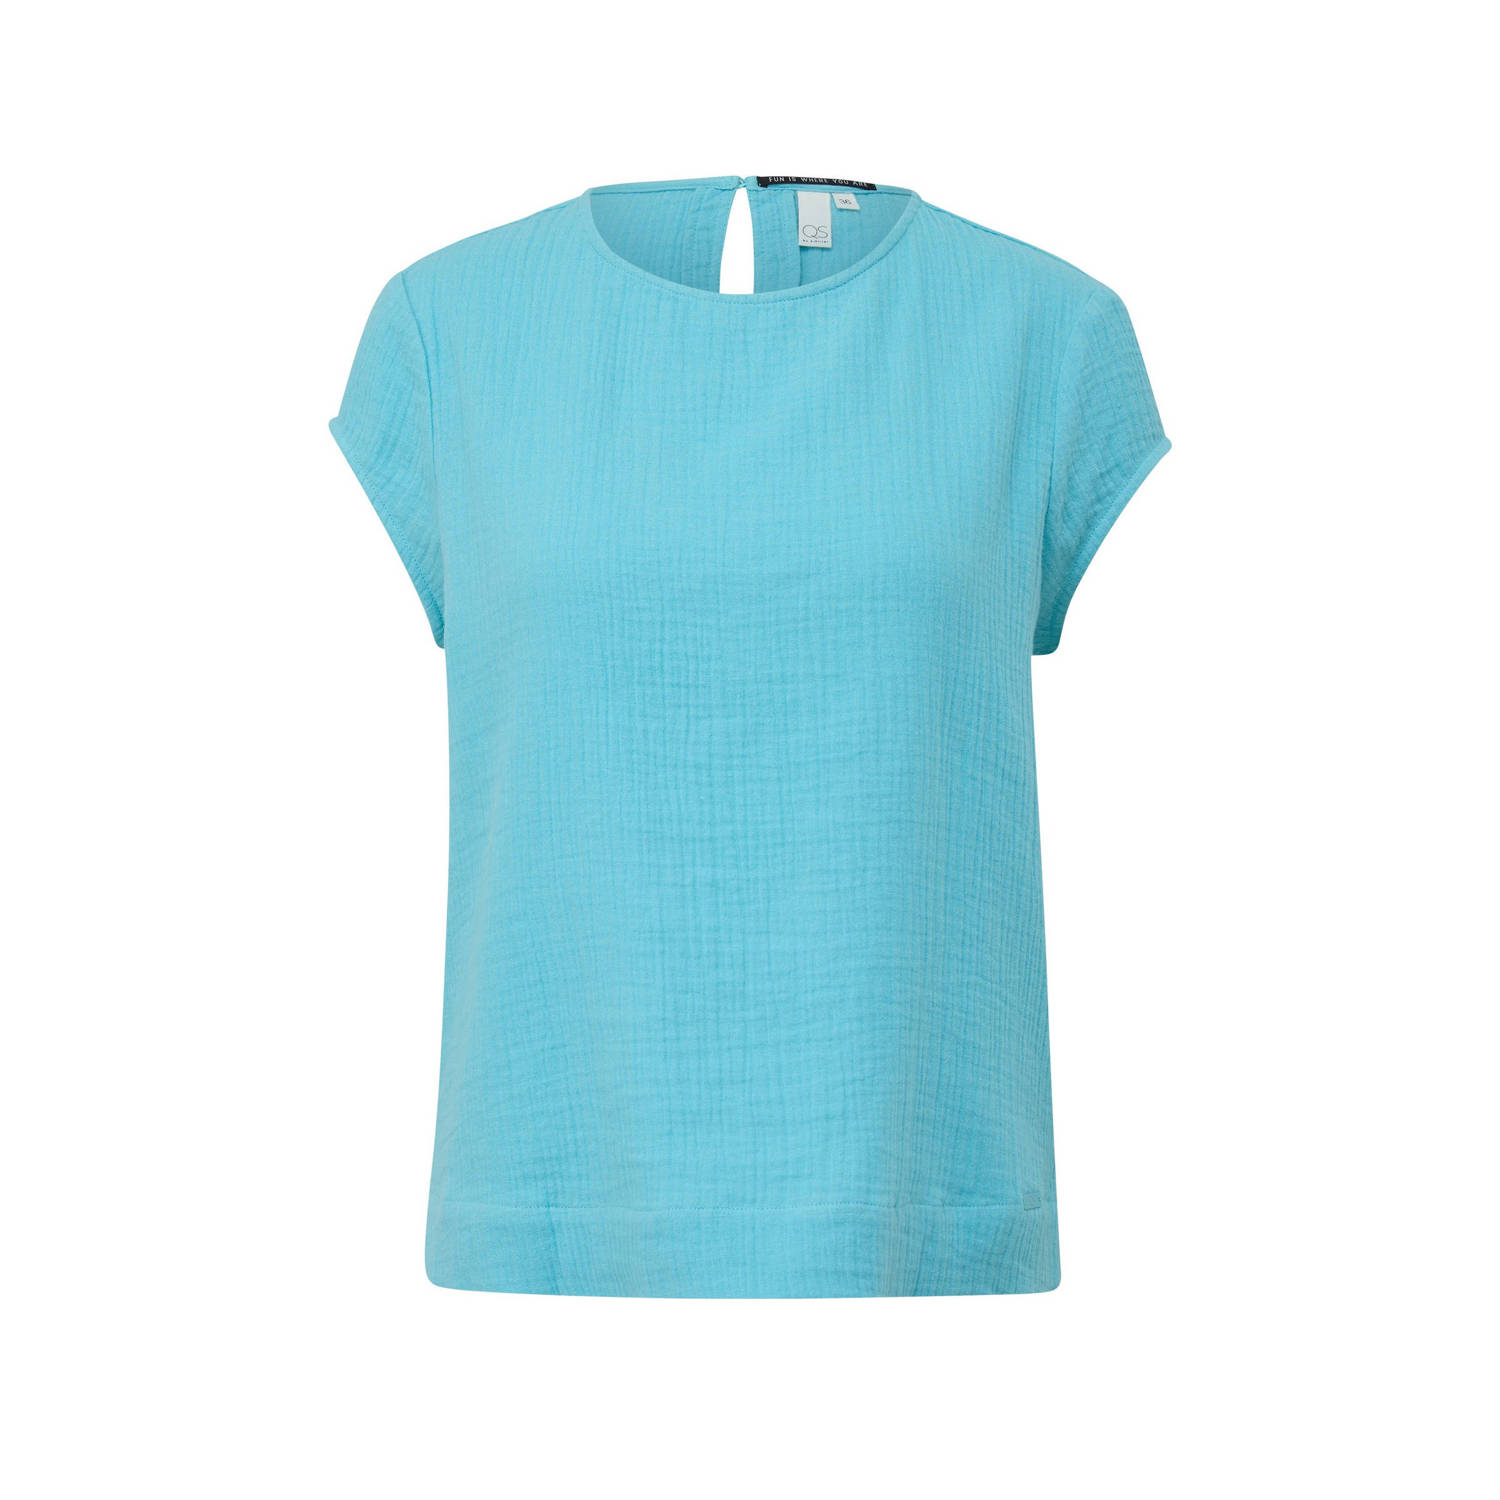 Q S by s.Oliver blousetop turquoise